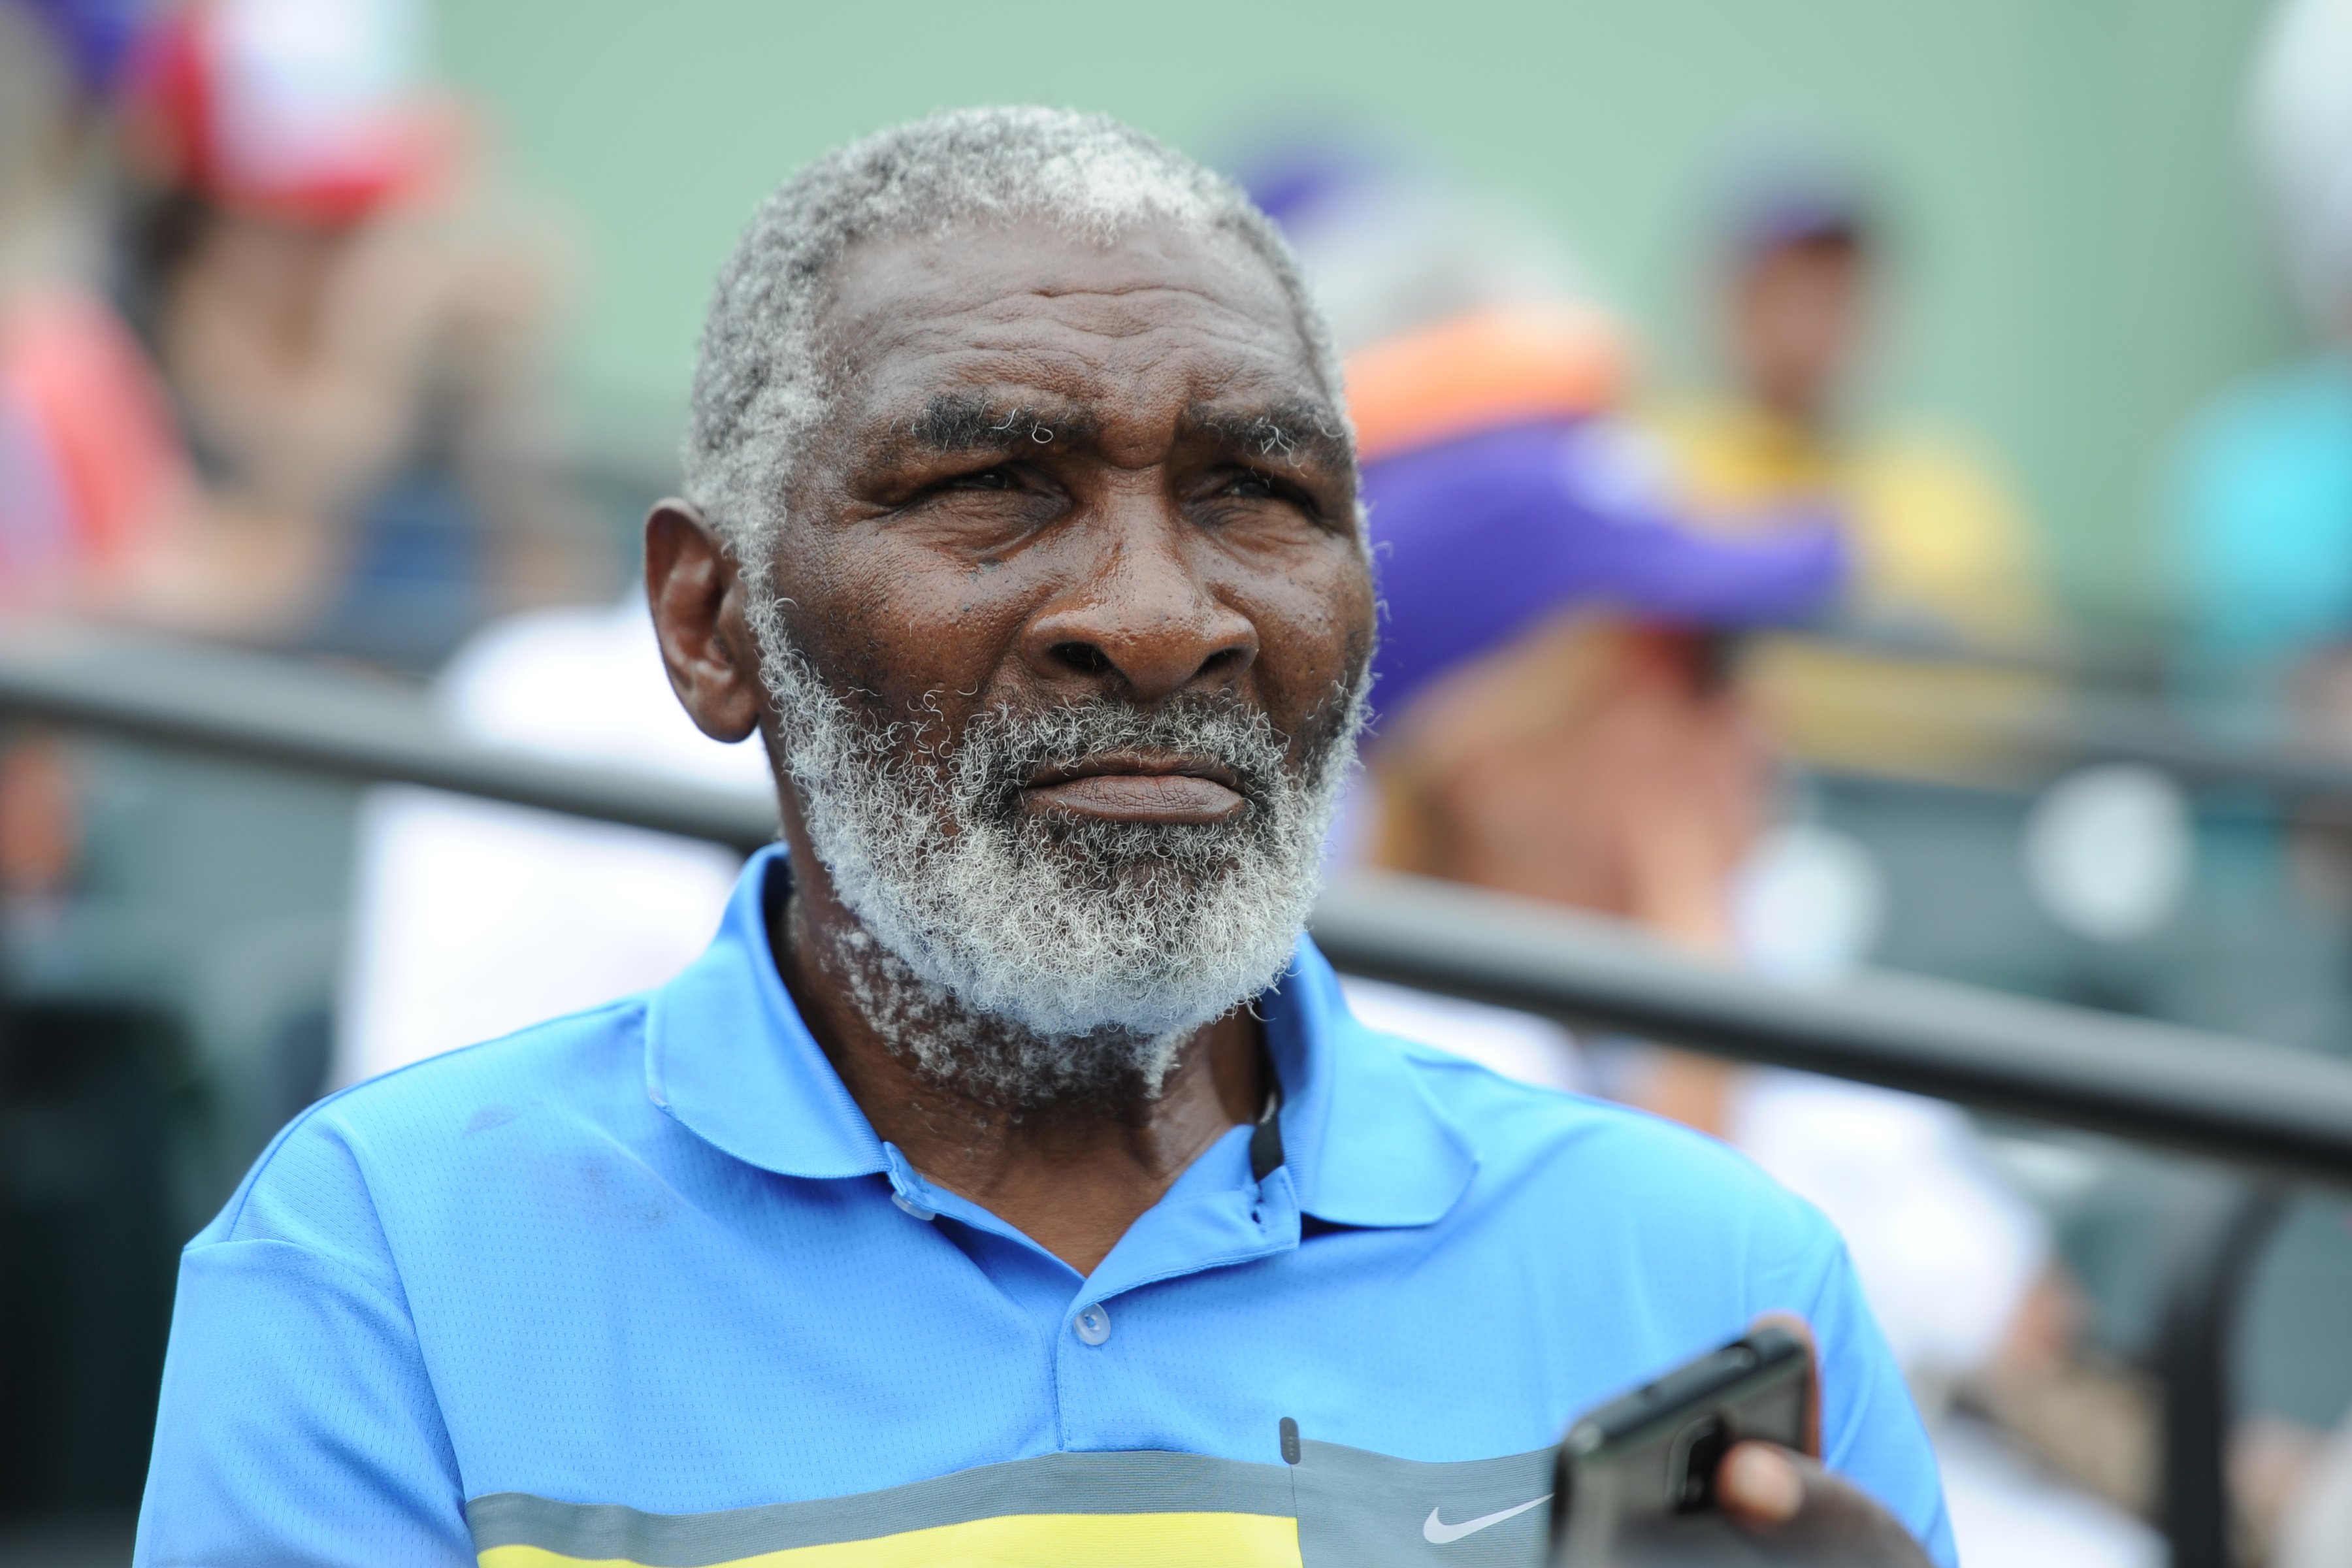 Richard Williams is seen at the Sony Open Tennis tournament at Crandon Park Tennis Center on March 29, 2014 in Key Biscayne, Florida | Source: Getty images 